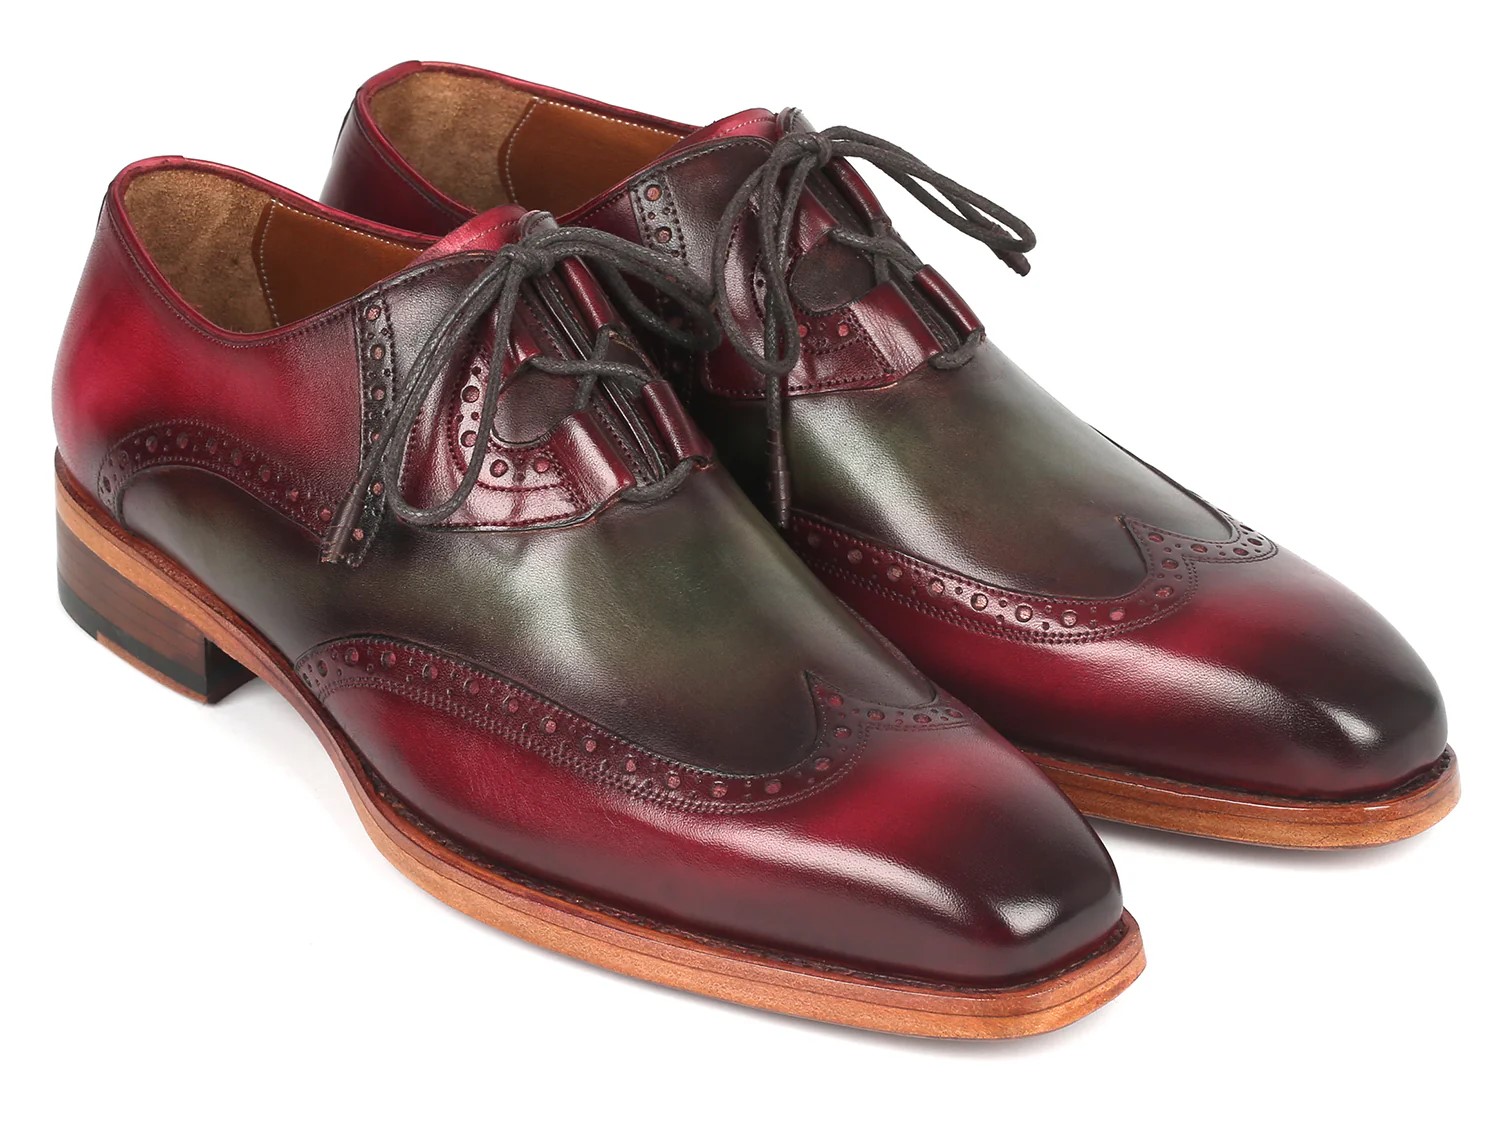 Paul Parkman Brogues Green / Bordeaux Genuine Leather Goodyear Welted Ghillie Lacing Oxford Dress Shoes 2955-GRB